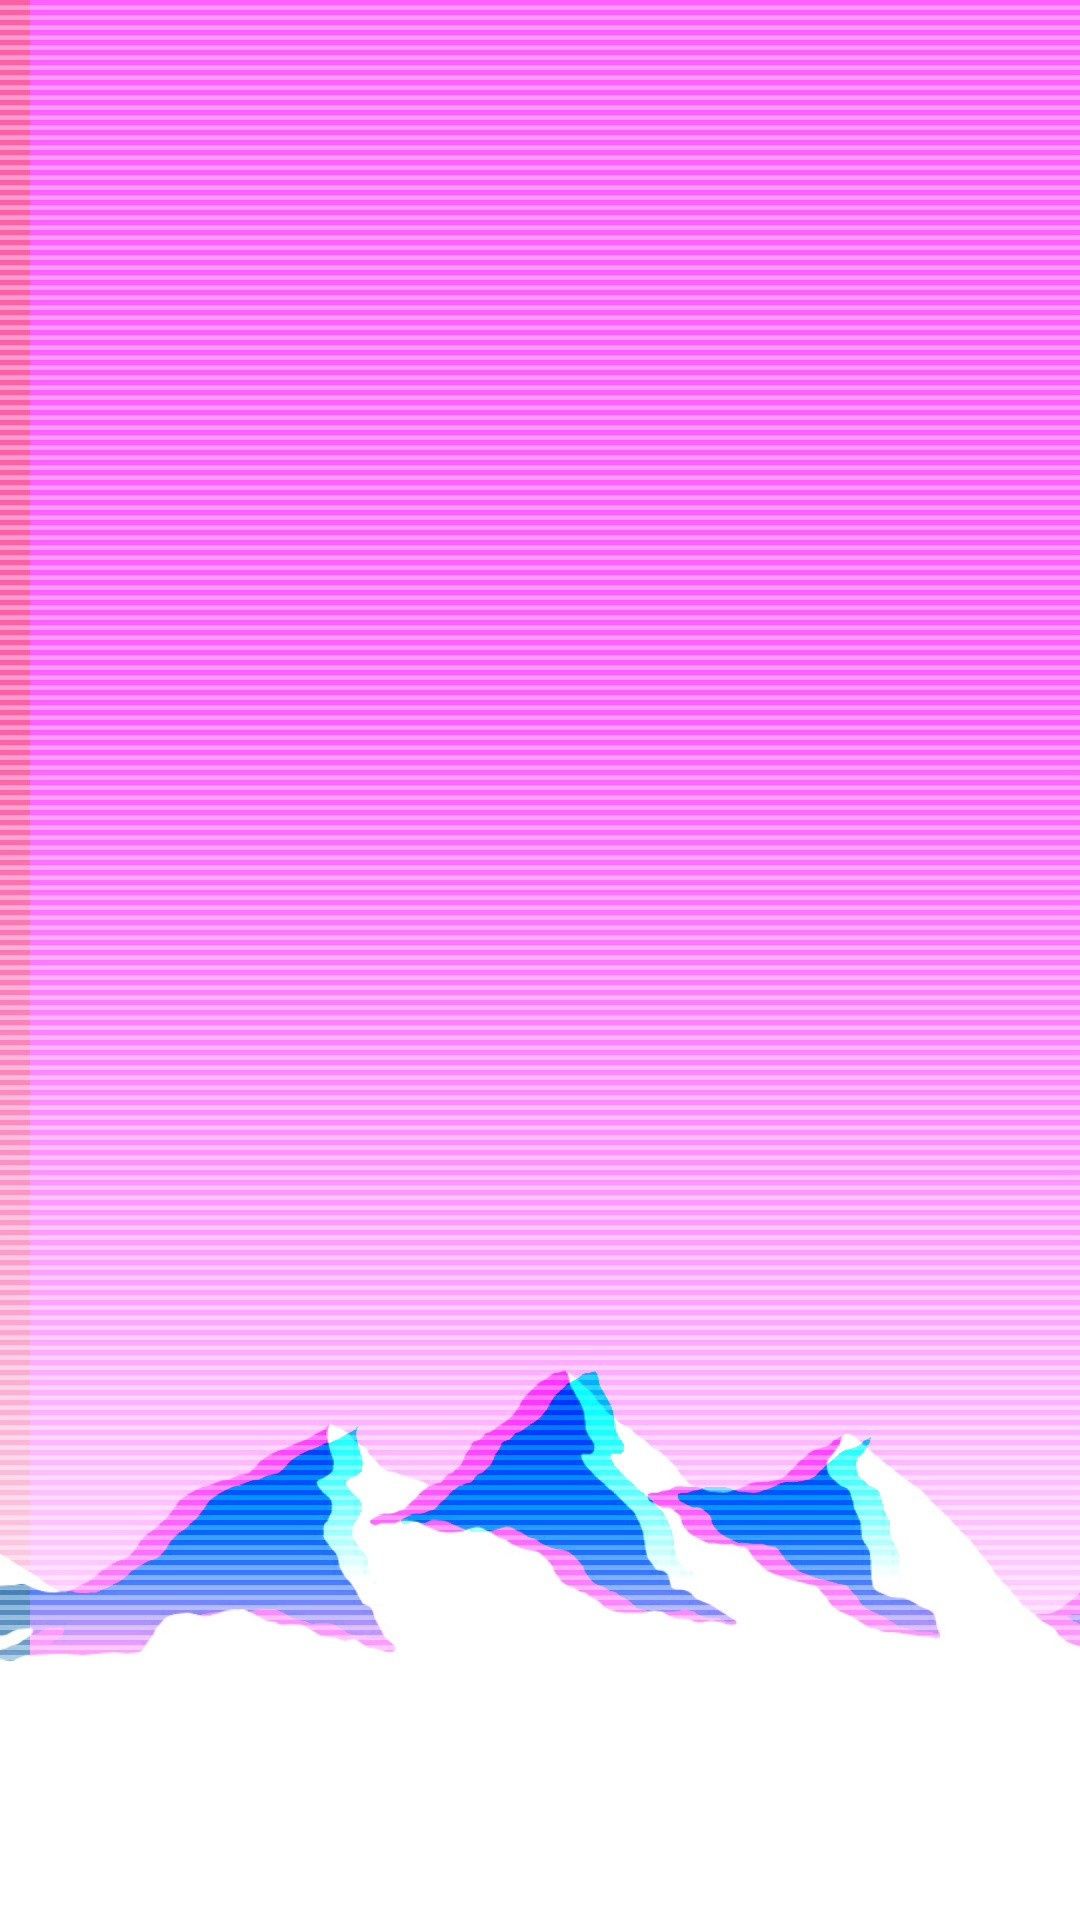 A pink and purple mountain illustration with a horizontal striped aesthetic. - Vaporwave